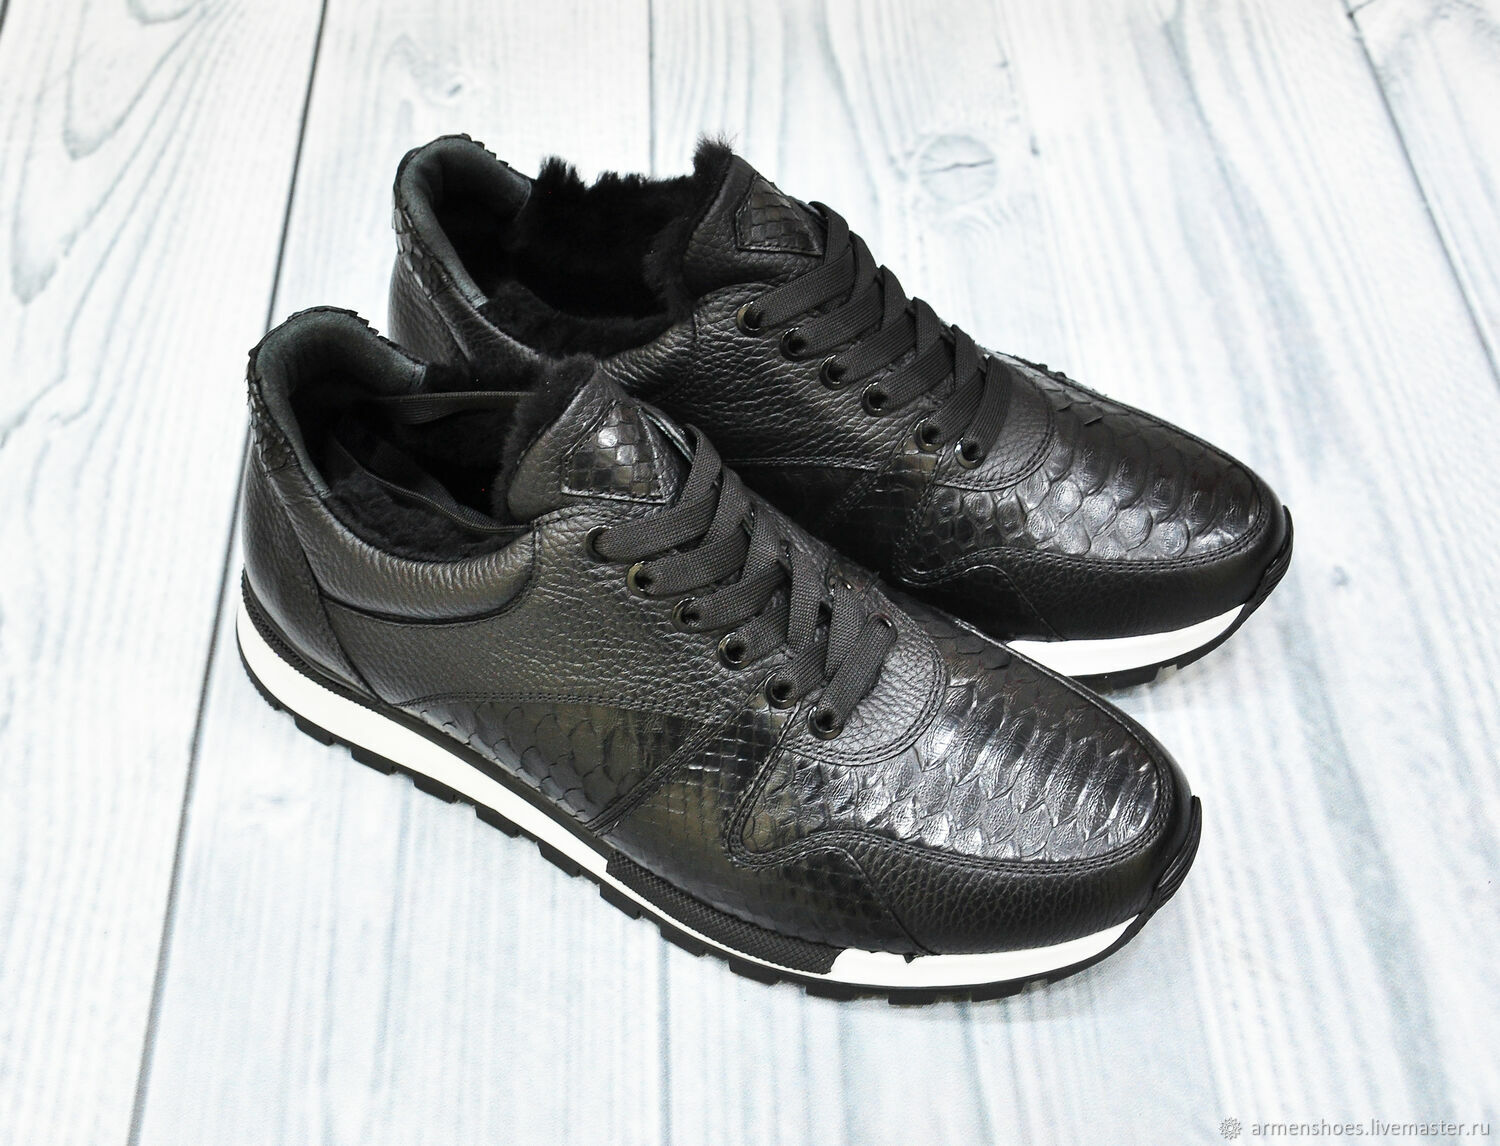 Men's sneakers, made of genuine python leather and calfskin, with fur, Sneakers, St. Petersburg,  Фото №1